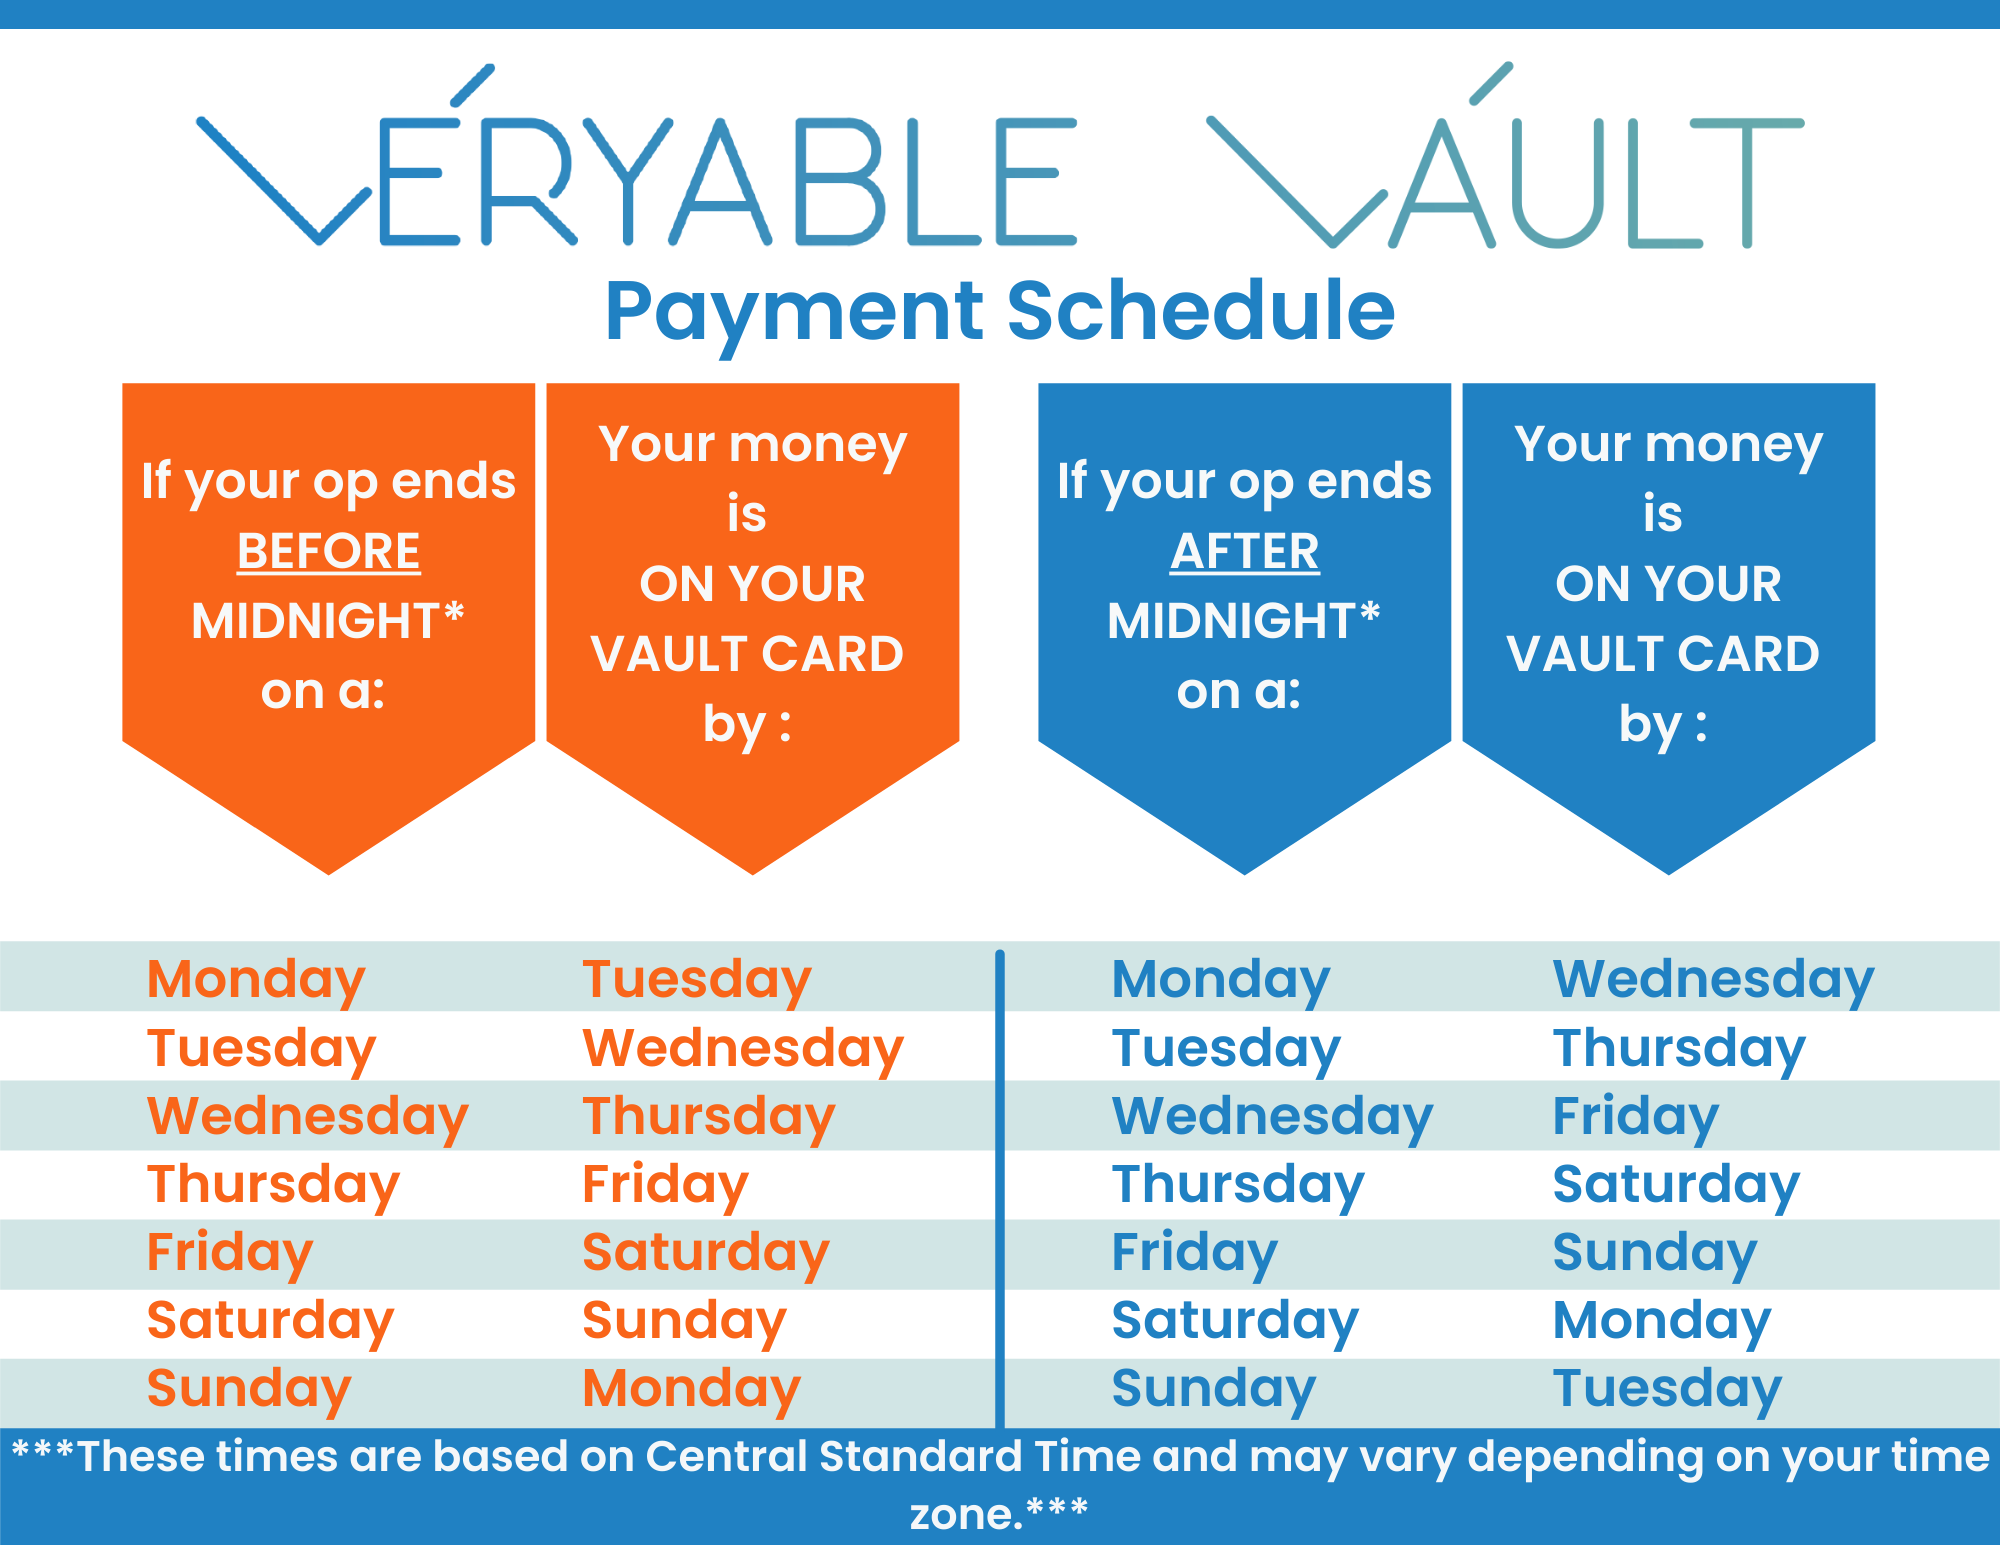 Veryable_Vault_Payment_Schedule.png